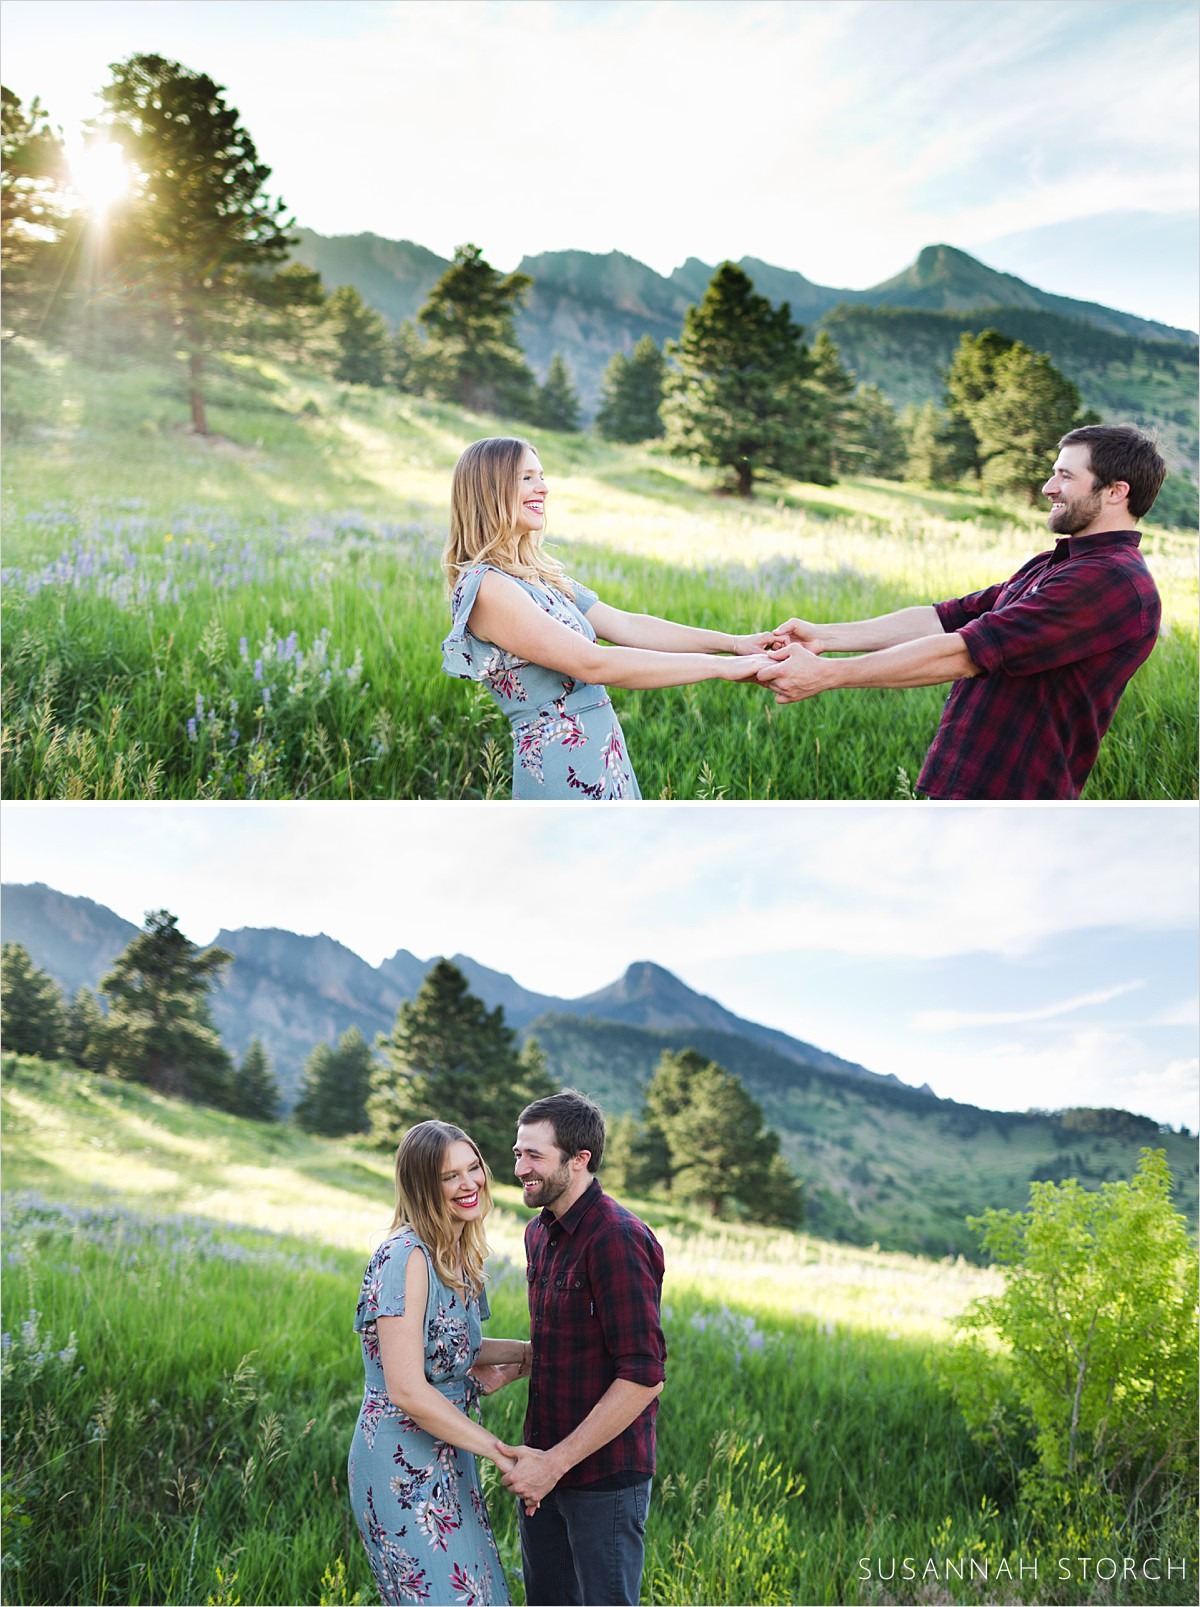 two images of a couple during their summer e-session